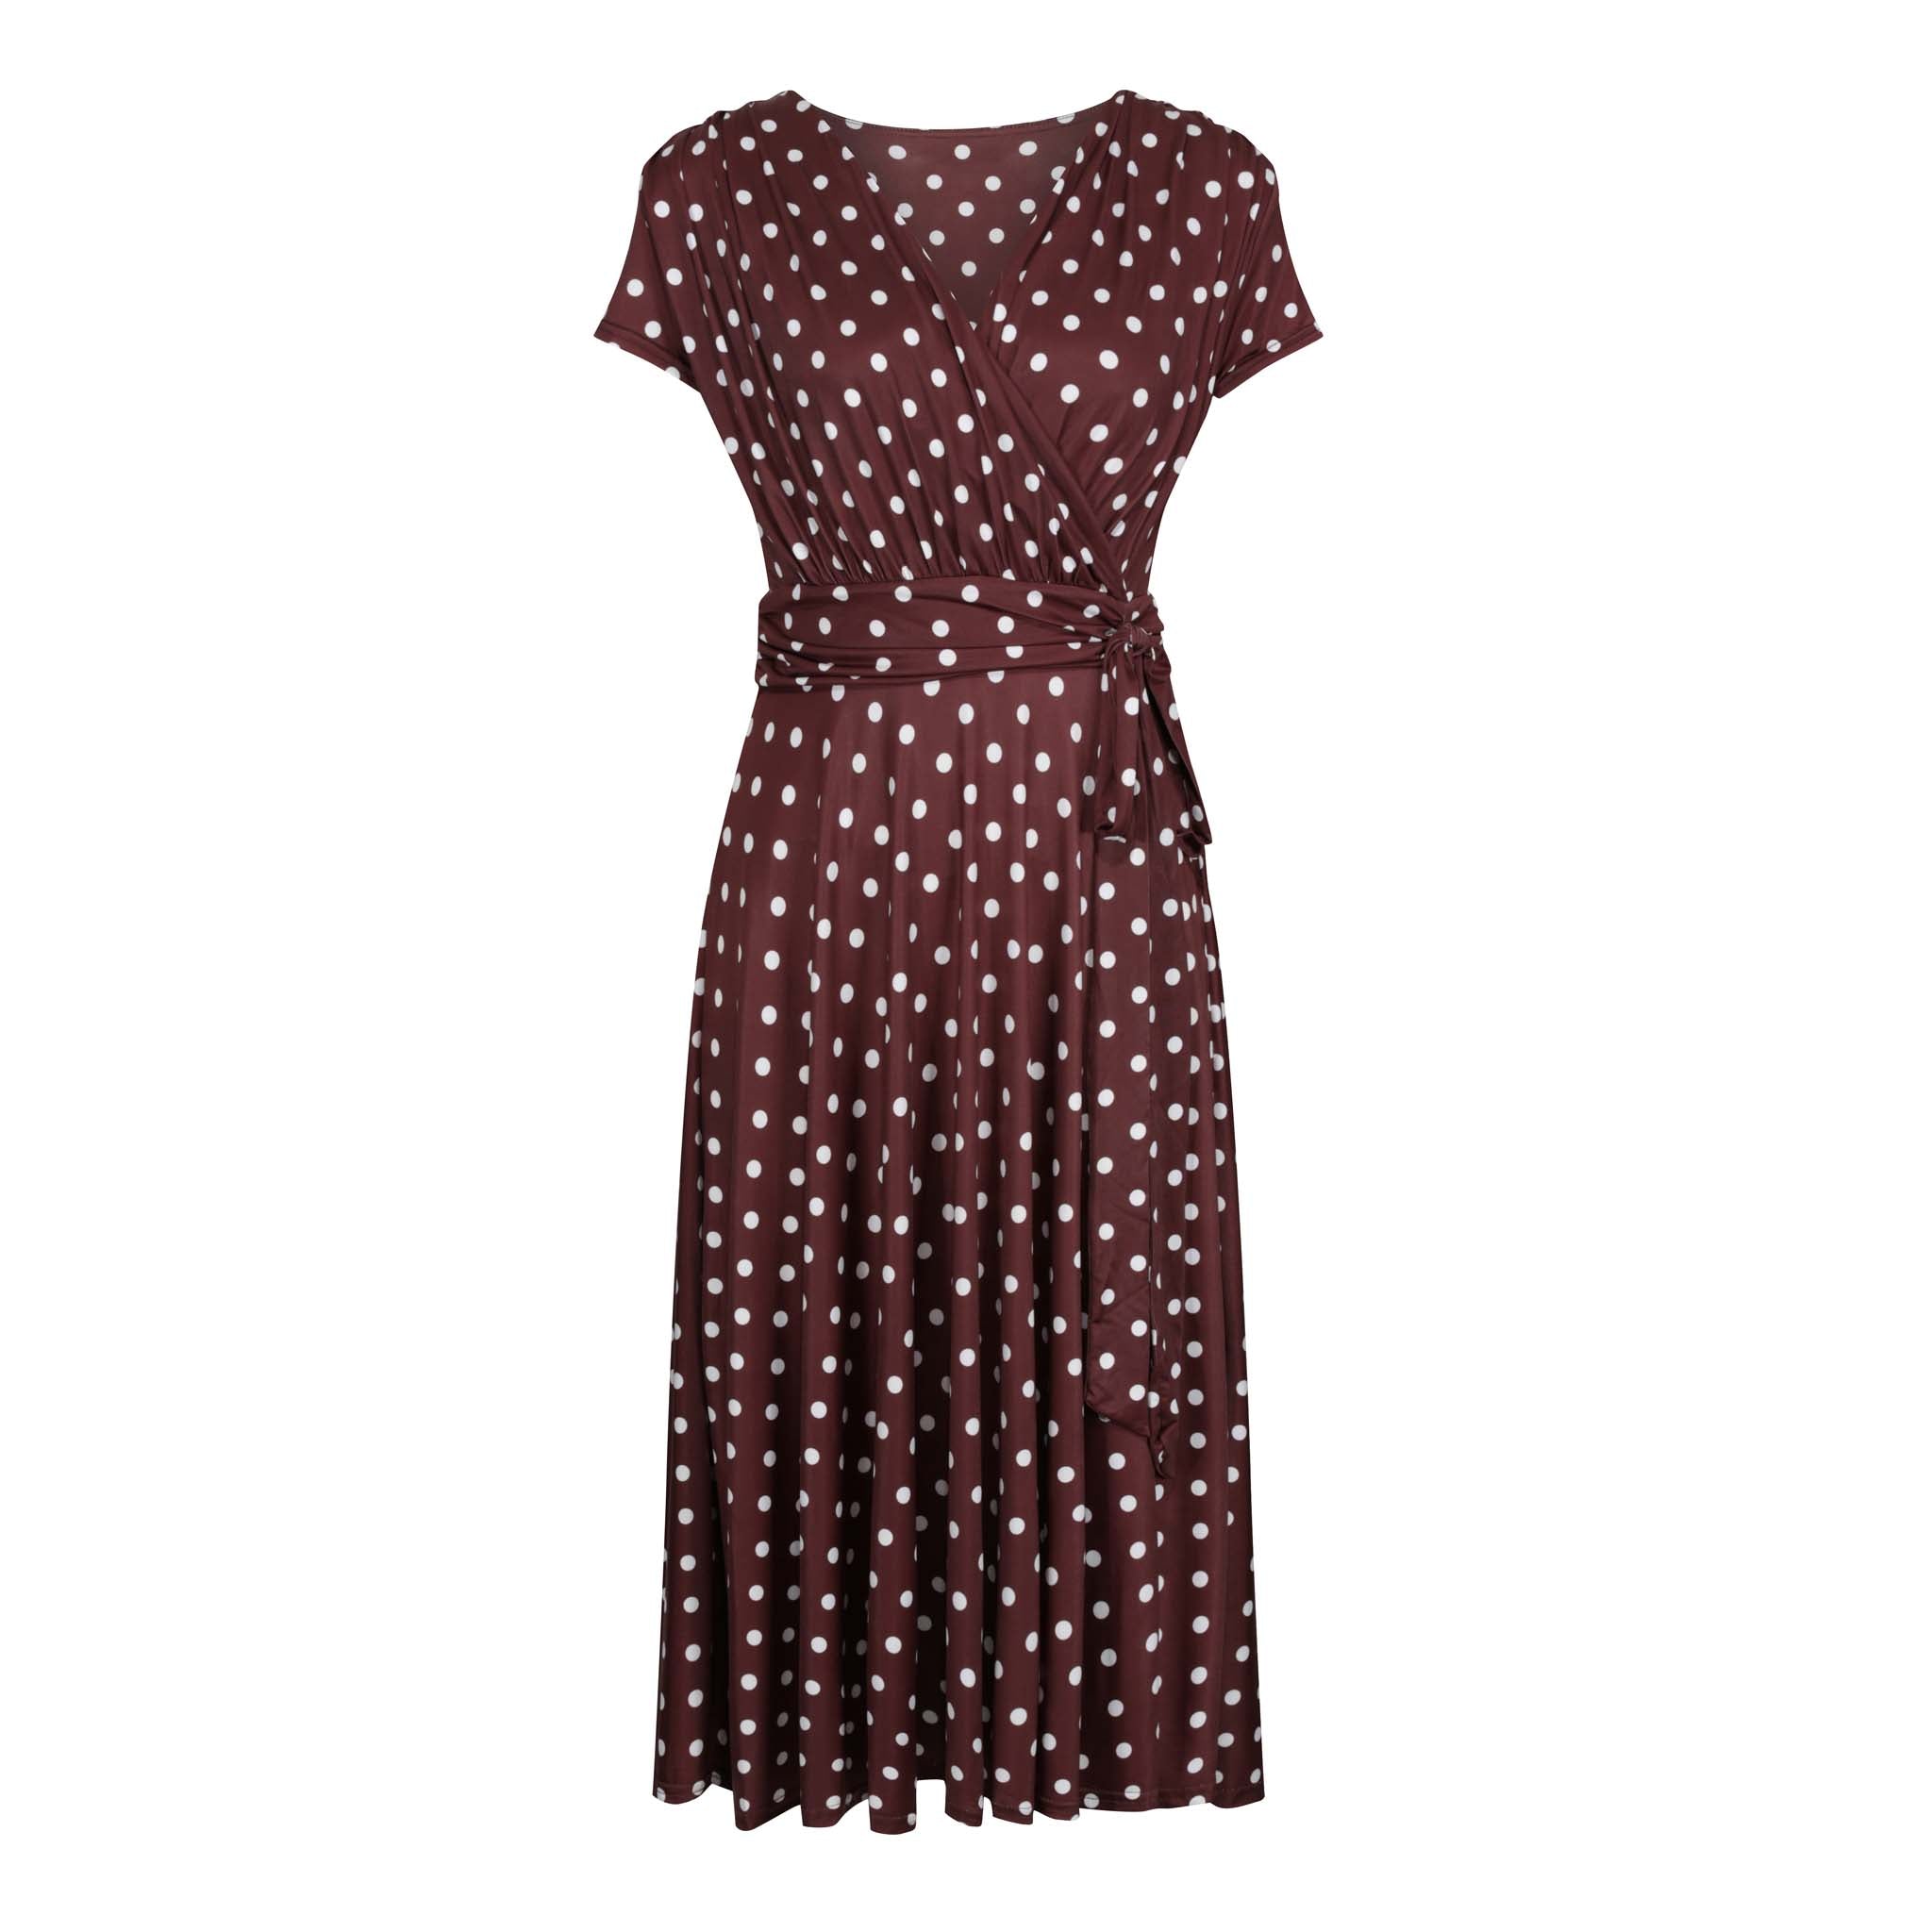 Chocolate Brown And White Polka Dot Cap Sleeve Fit And Flare Midi Dress